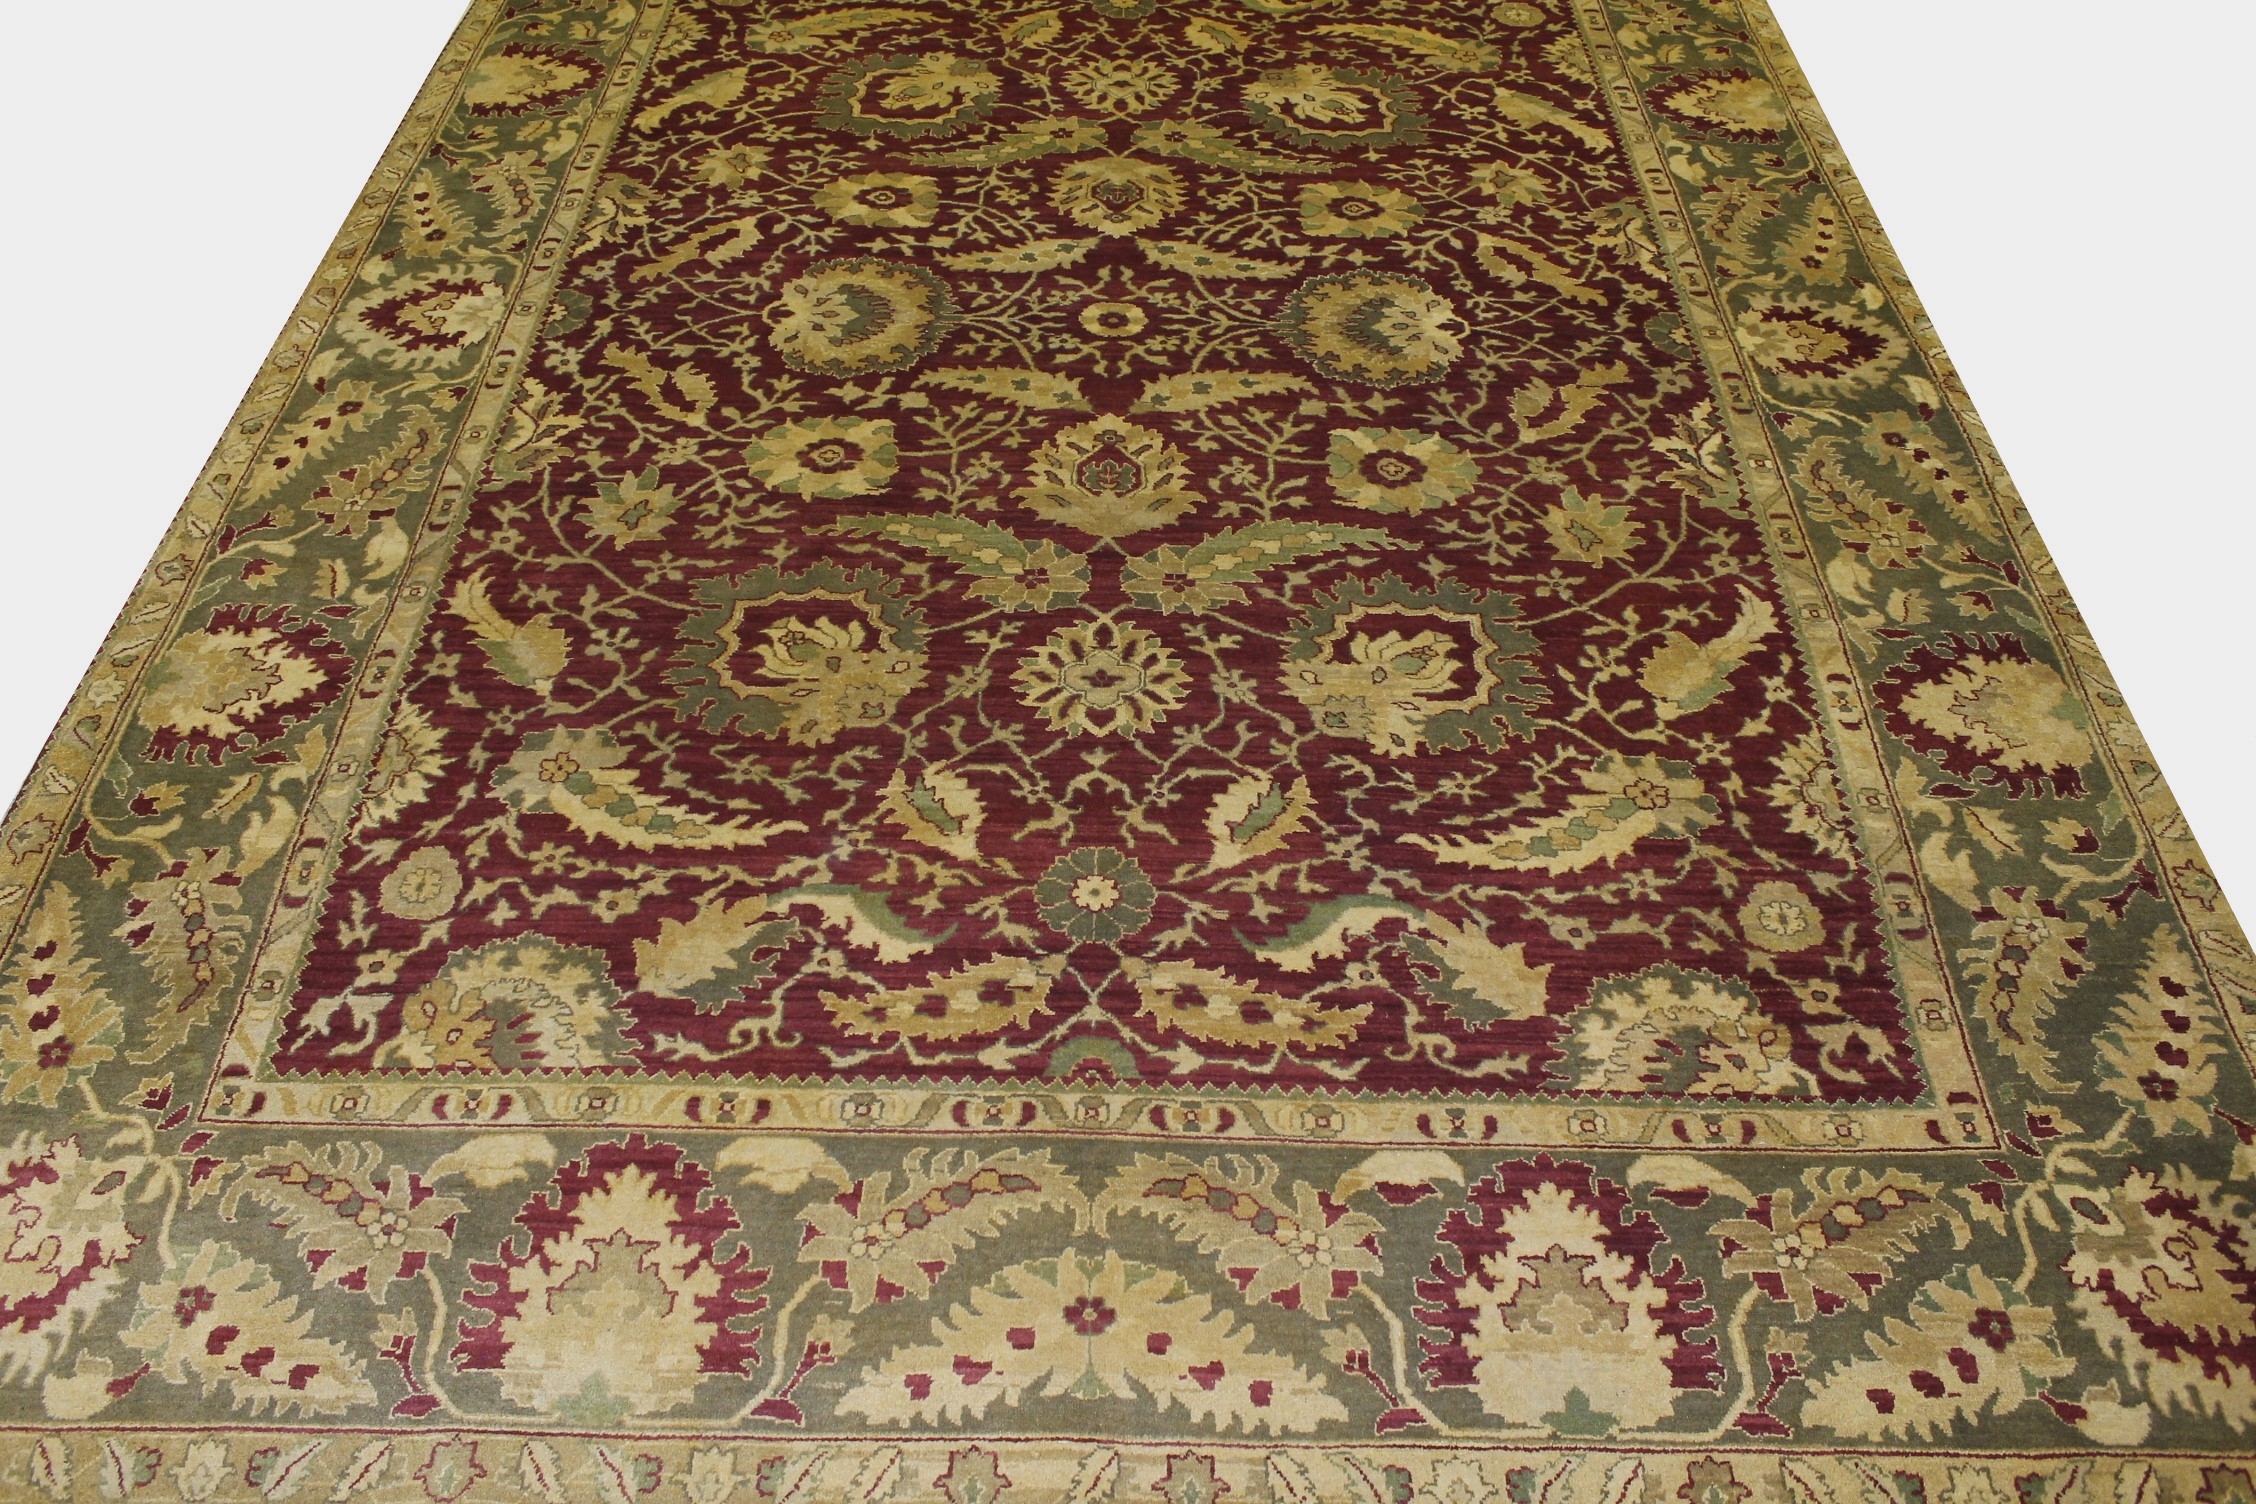 Clearance & Discount Rugs Agra BG-212 0792 Red - Burgundy & Lt. Gold - Gold Hand Knotted Rug